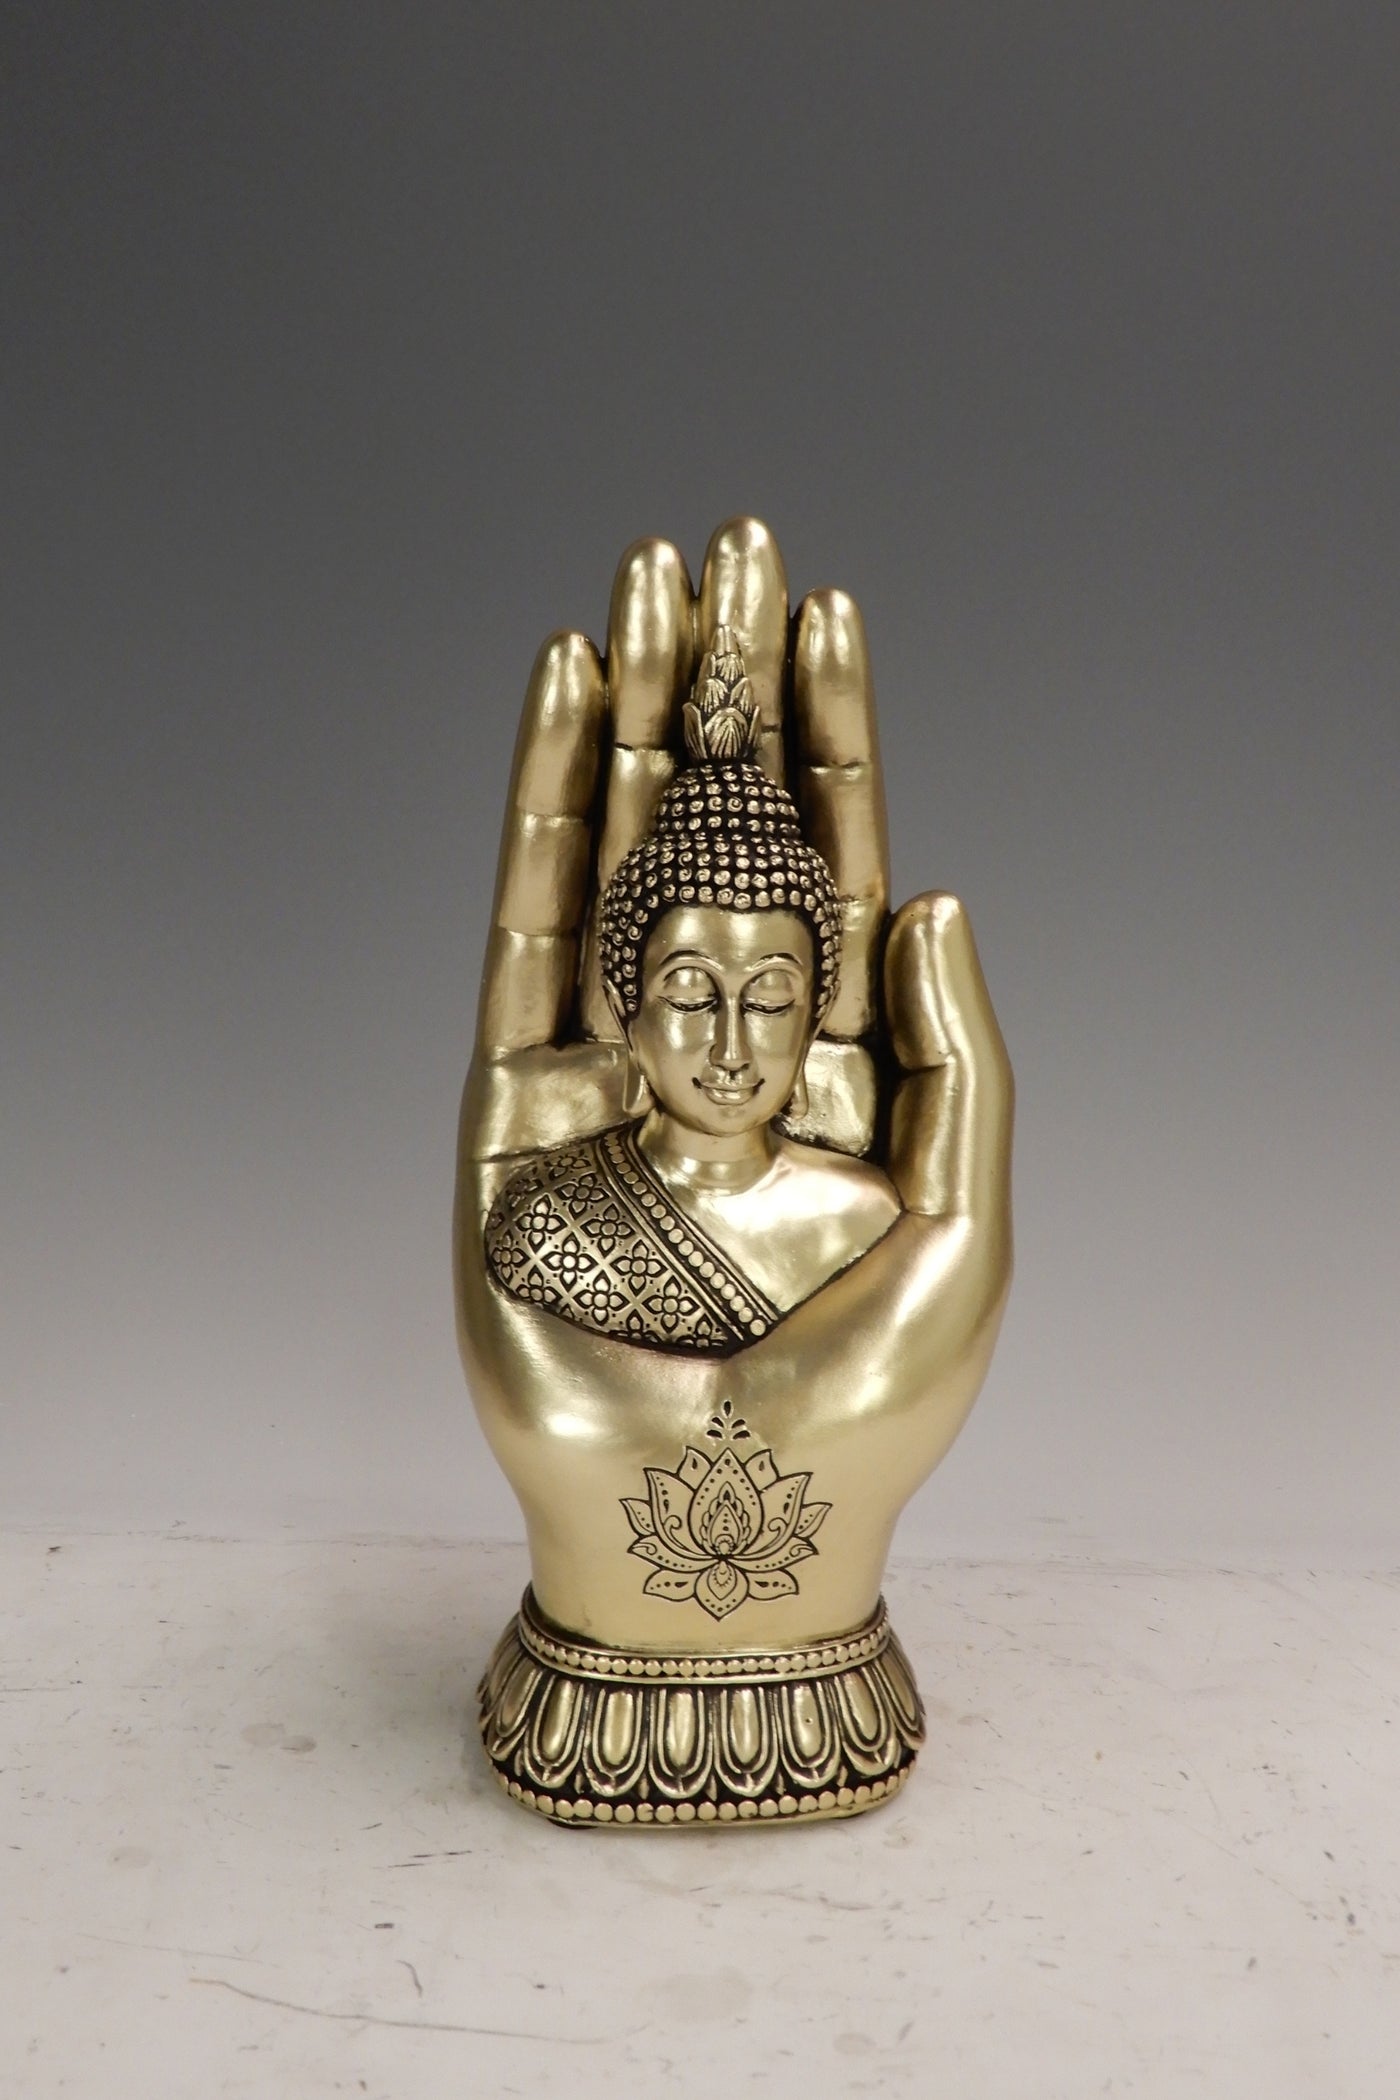 Gautam Buddha face statue on hand for your home or office decor